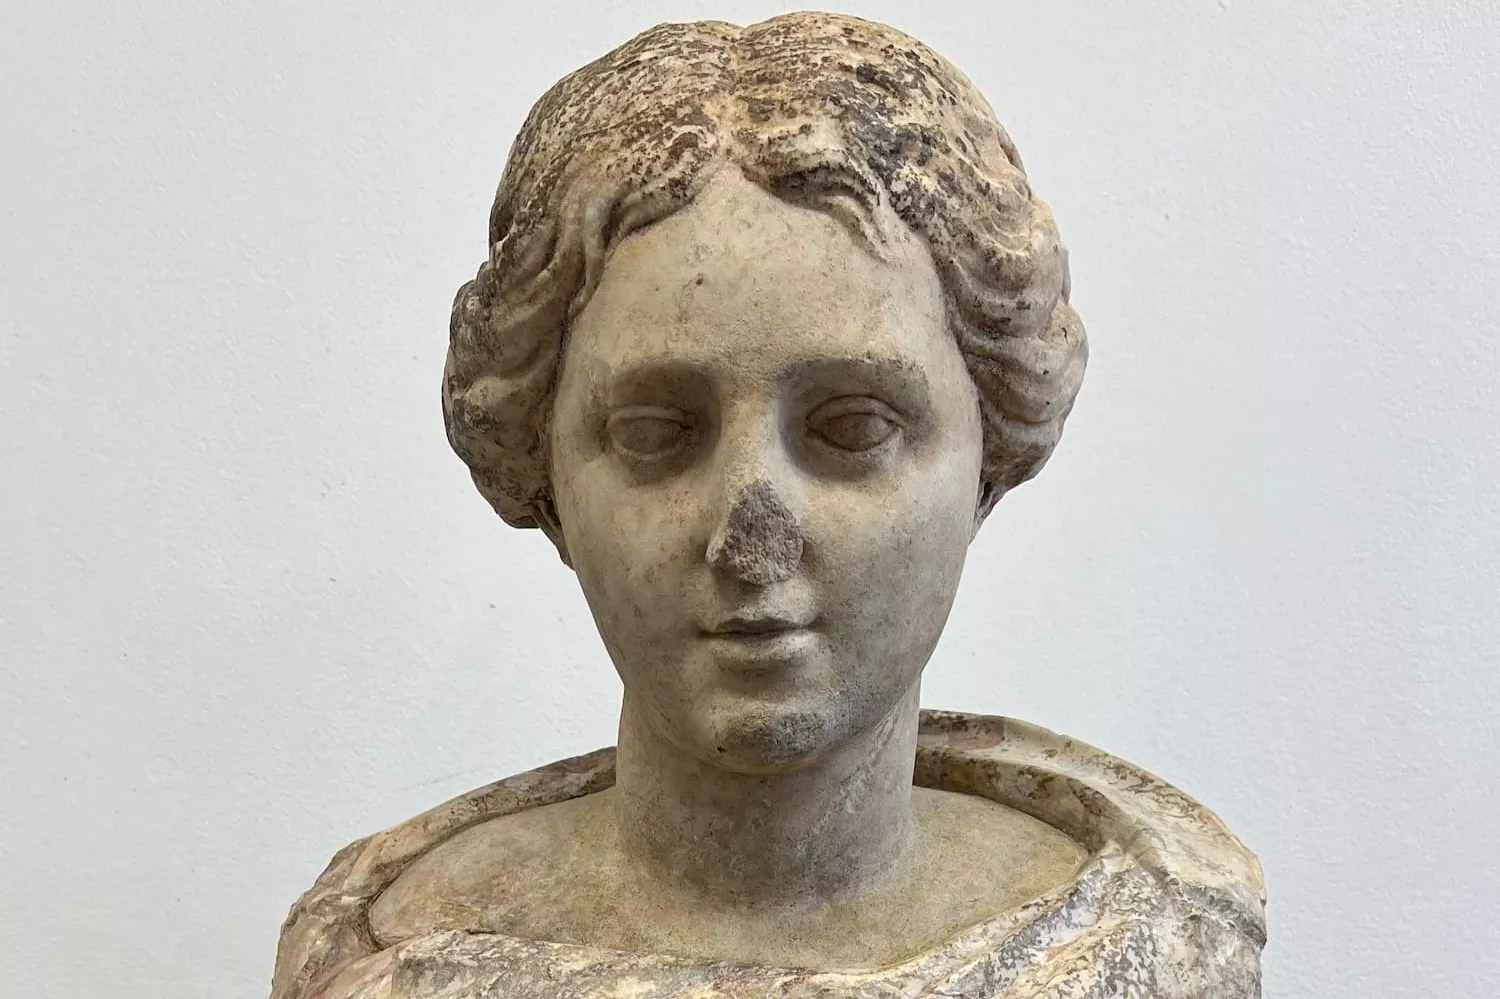 Roman marble bust found under Burghley parking lot